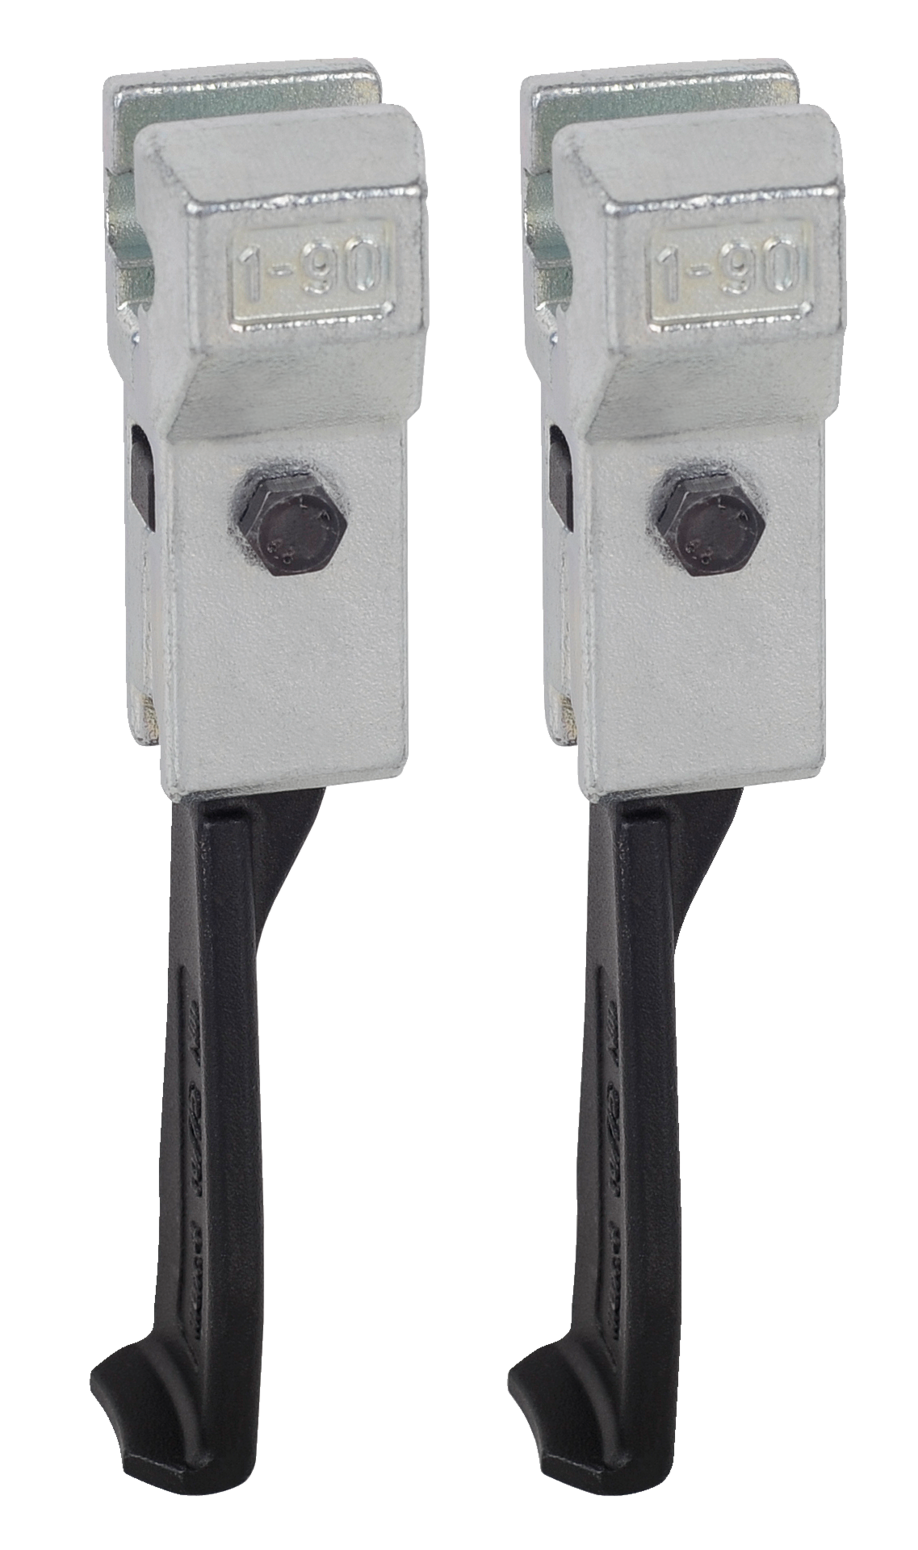 A pair of extremely narrow 4-P series trigger hooks for 2-arm universal pullers